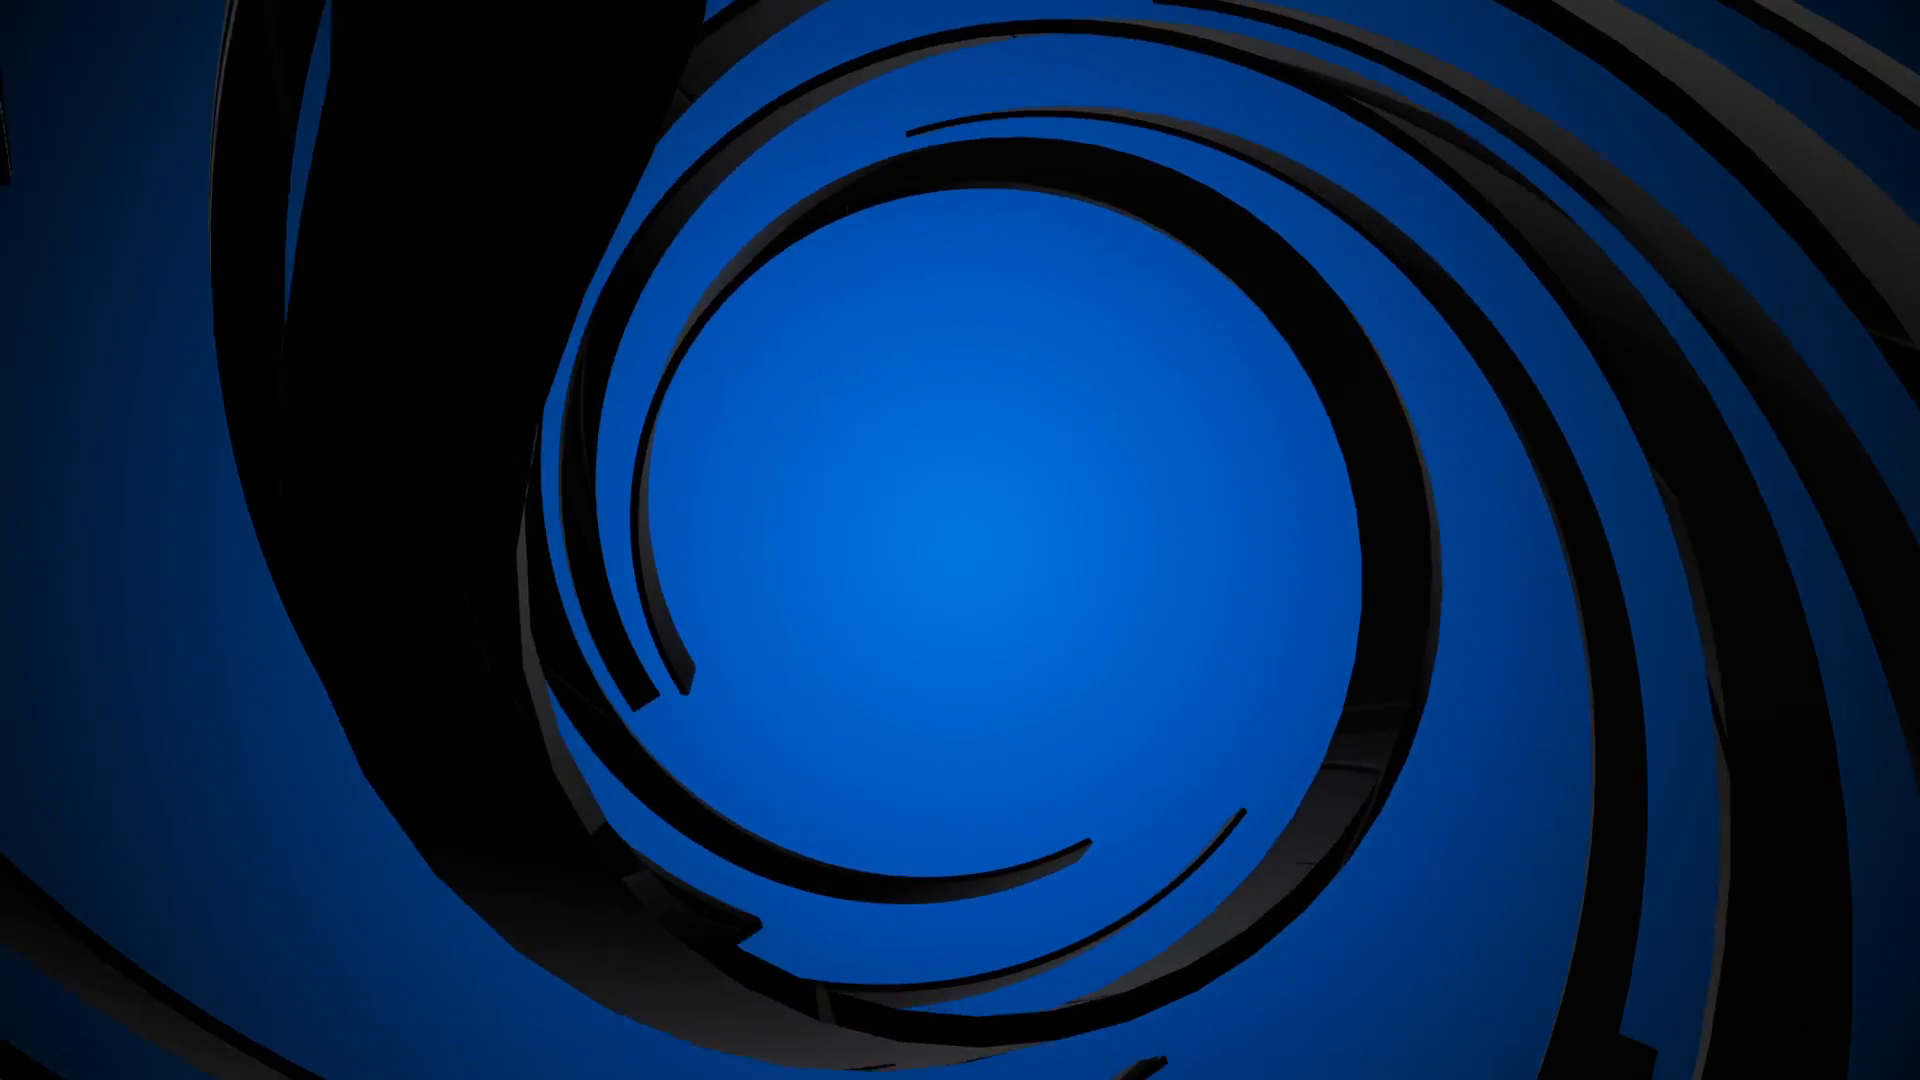 Blue background with spiral Black shape. Full HD Resolution ...